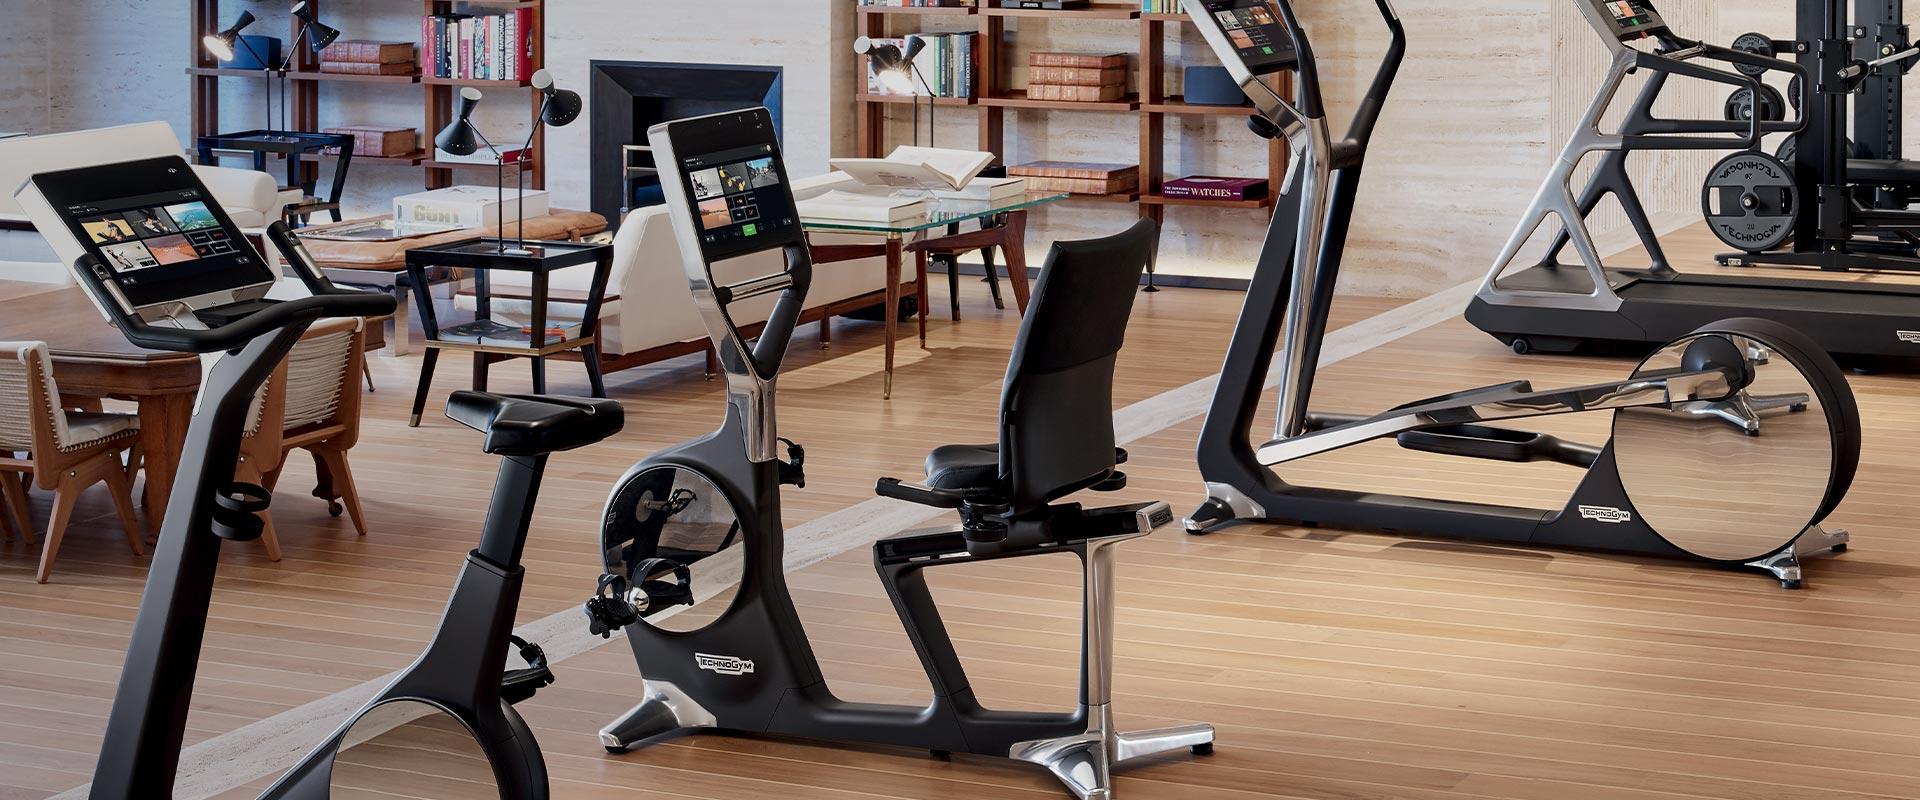 Technogym continues to grow in 2017